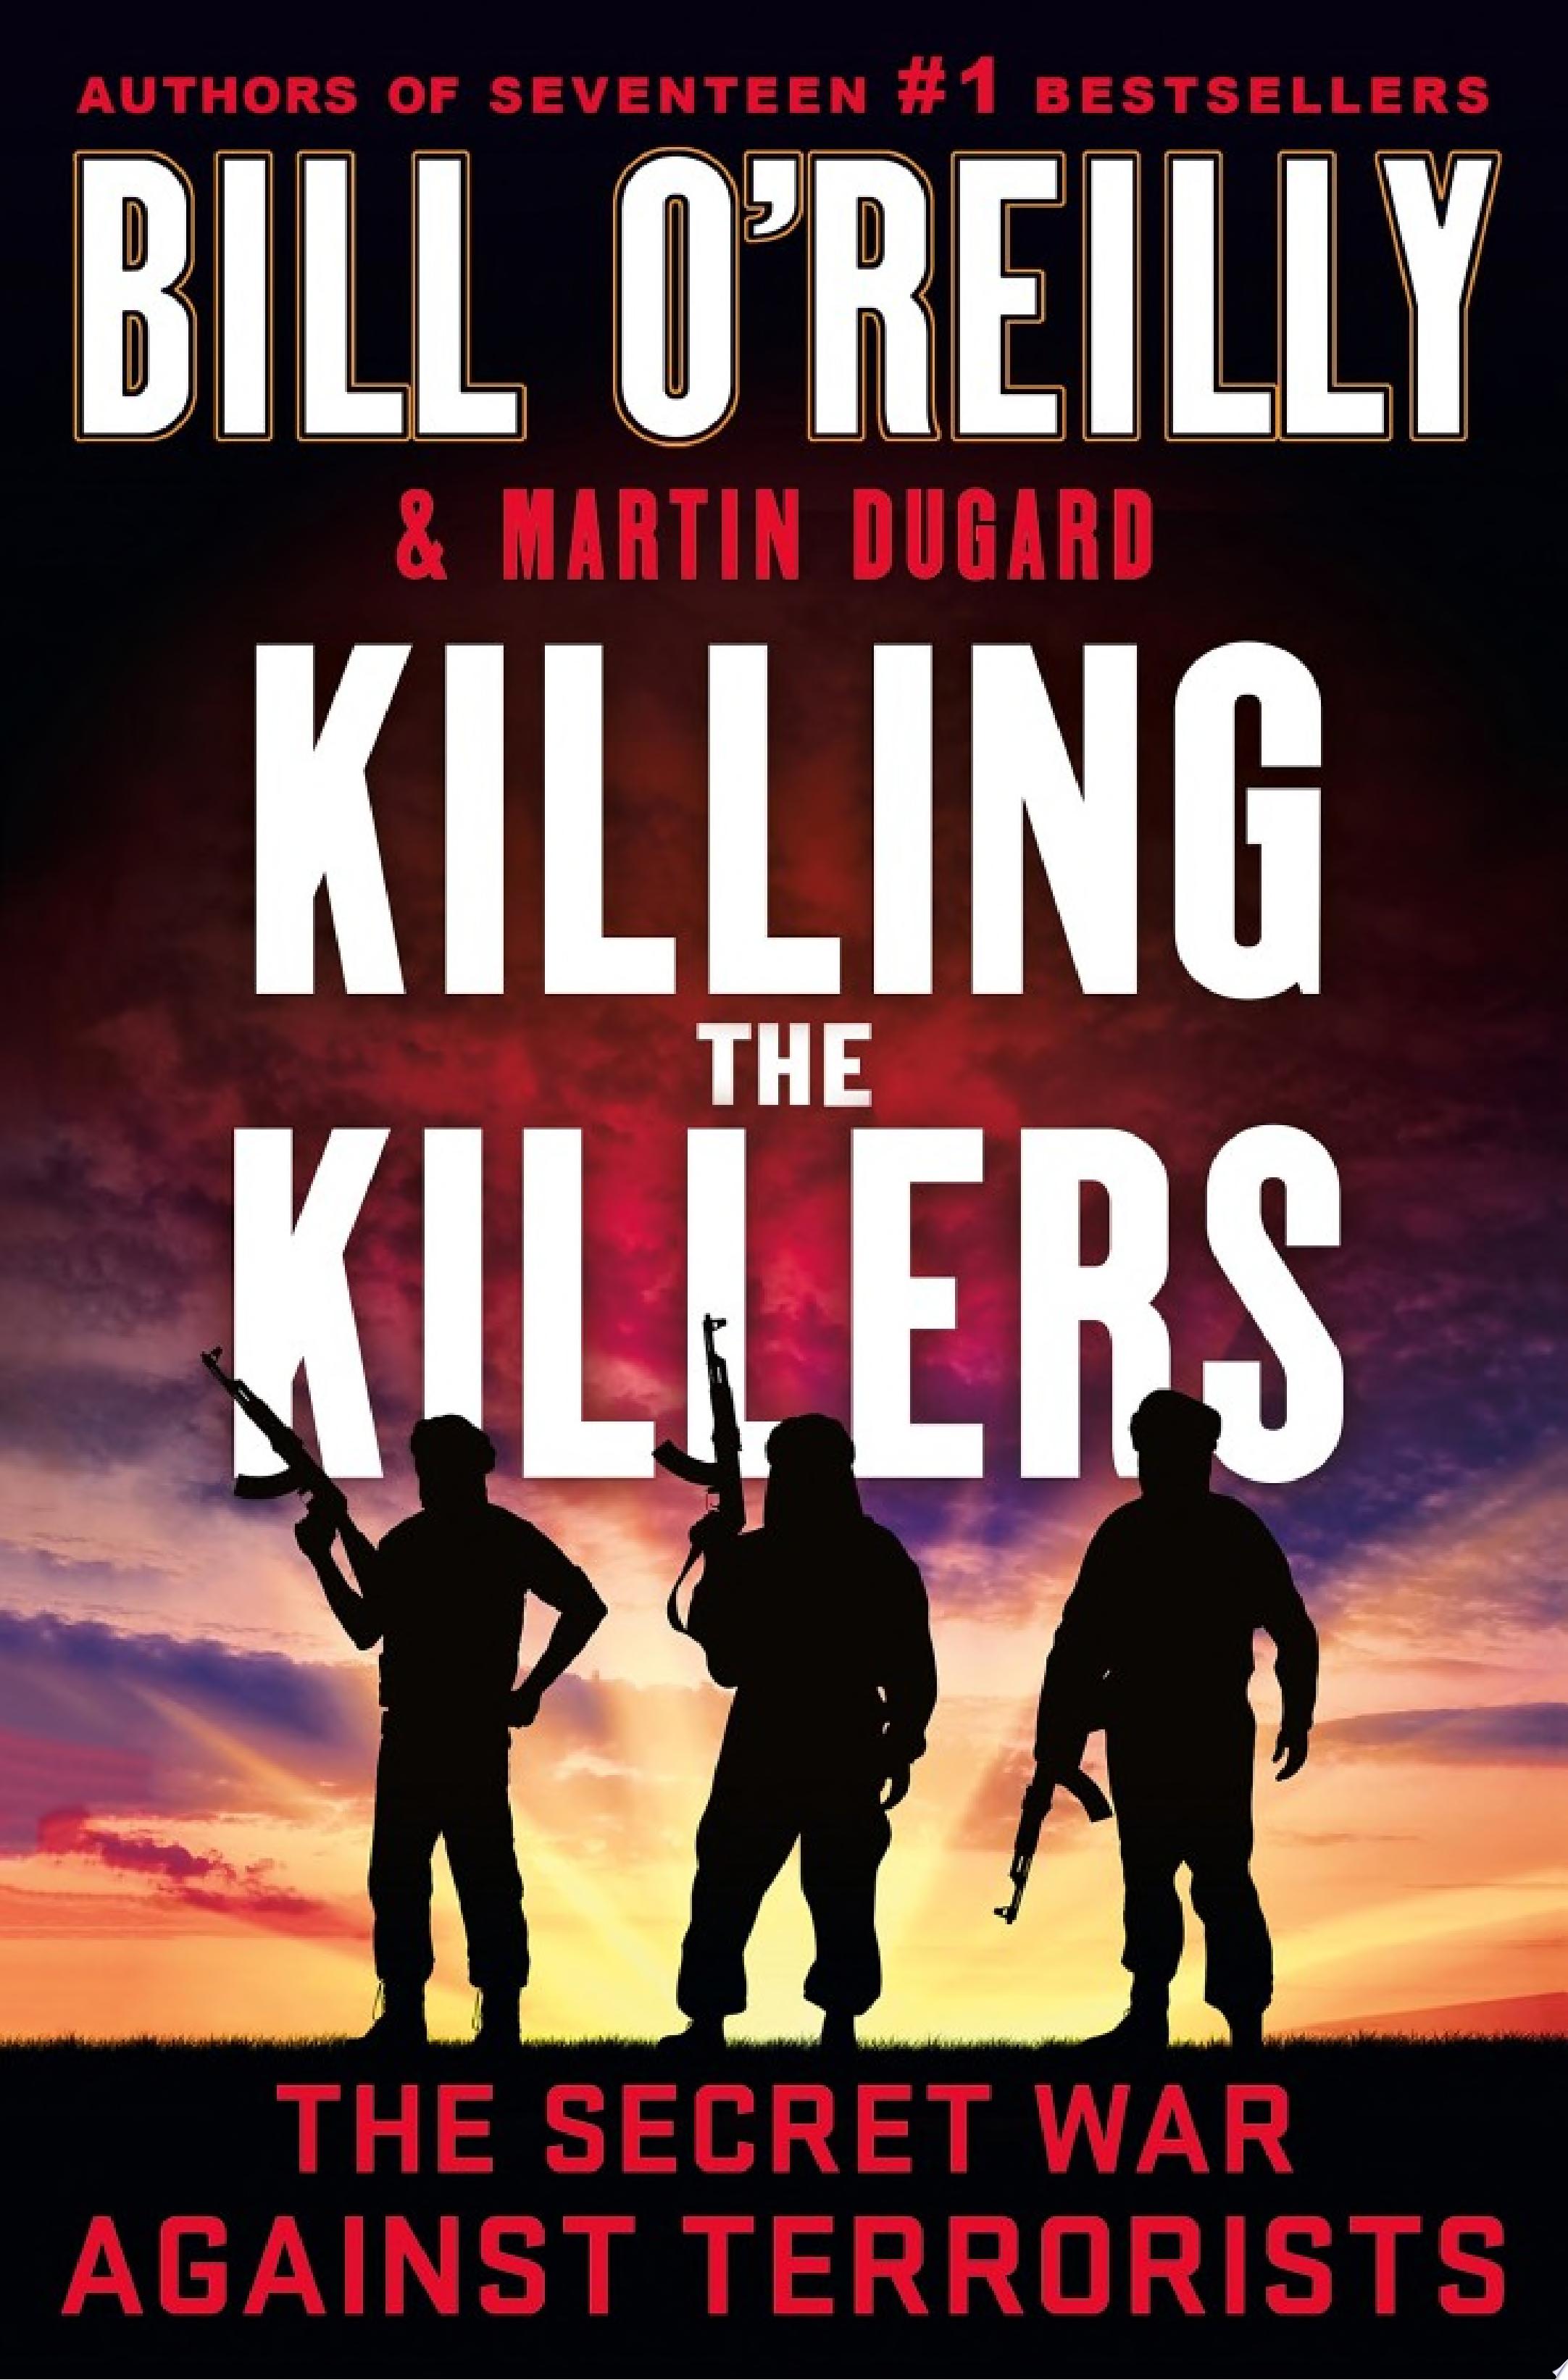 Image for "Killing the Killers"